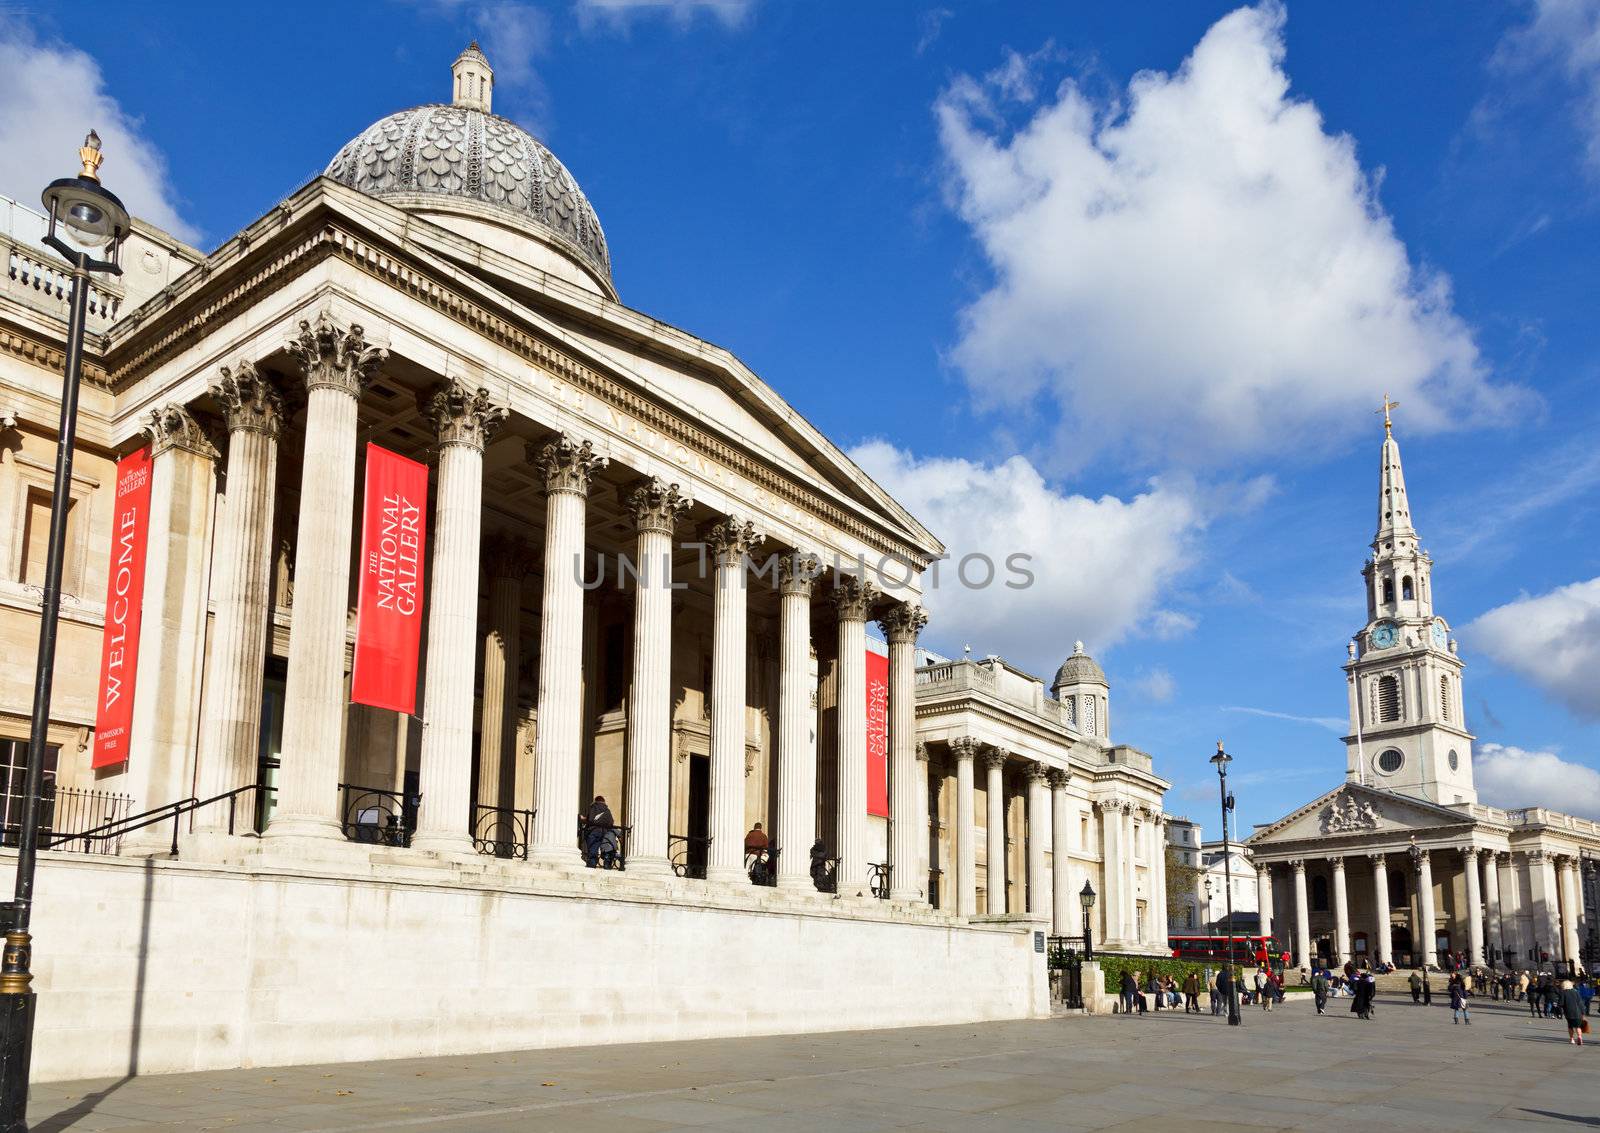 The National Gallery and the St. Martin-in-the-Fields church in London